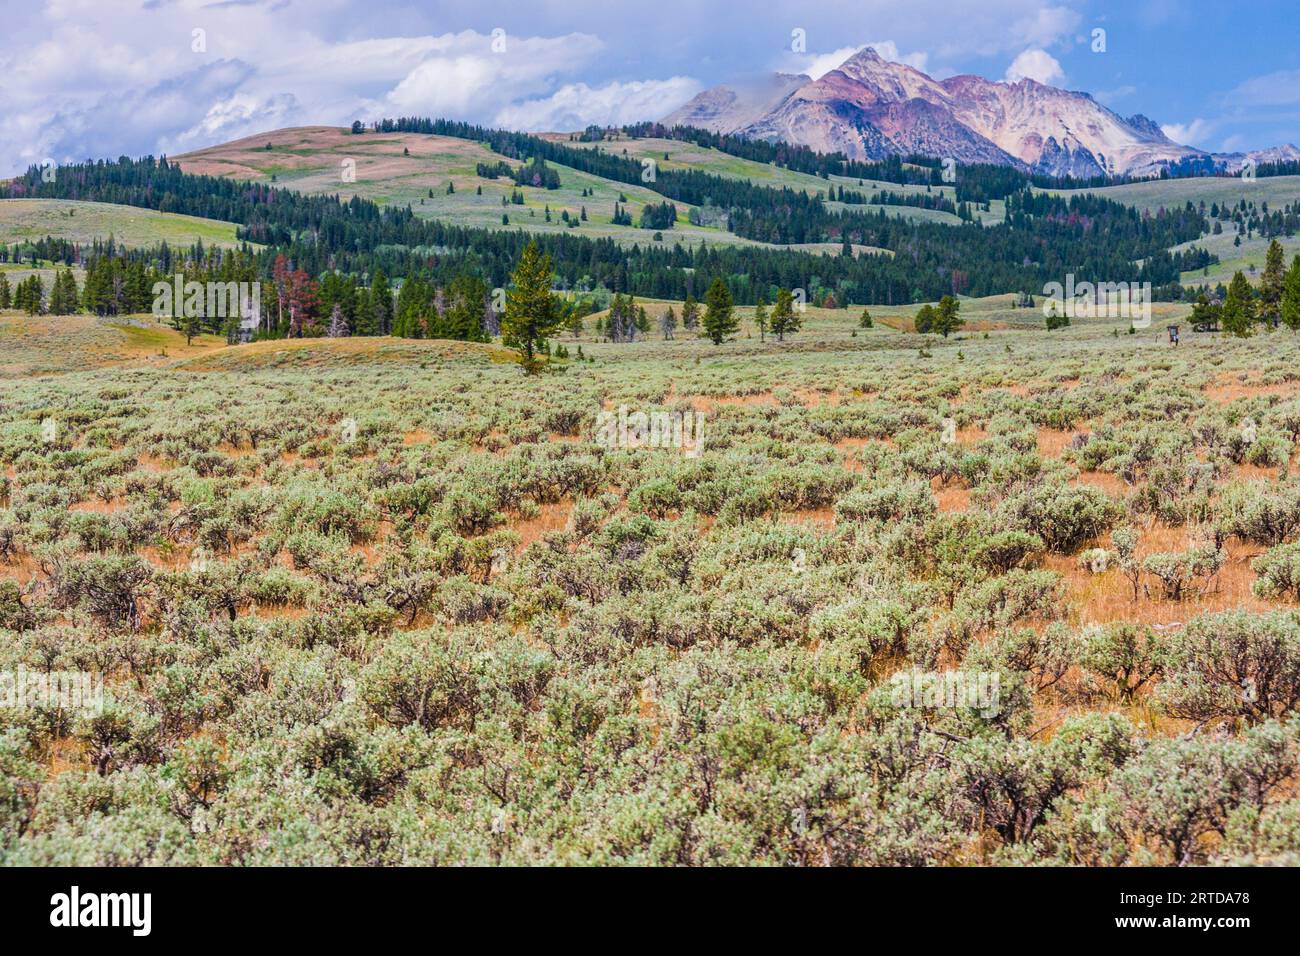 Sagebrush and native grass meadow with view of Gallatin Mountain Range near Mammoth Hot Springs in Yellowstone National Park in Wyoming. Stock Photo